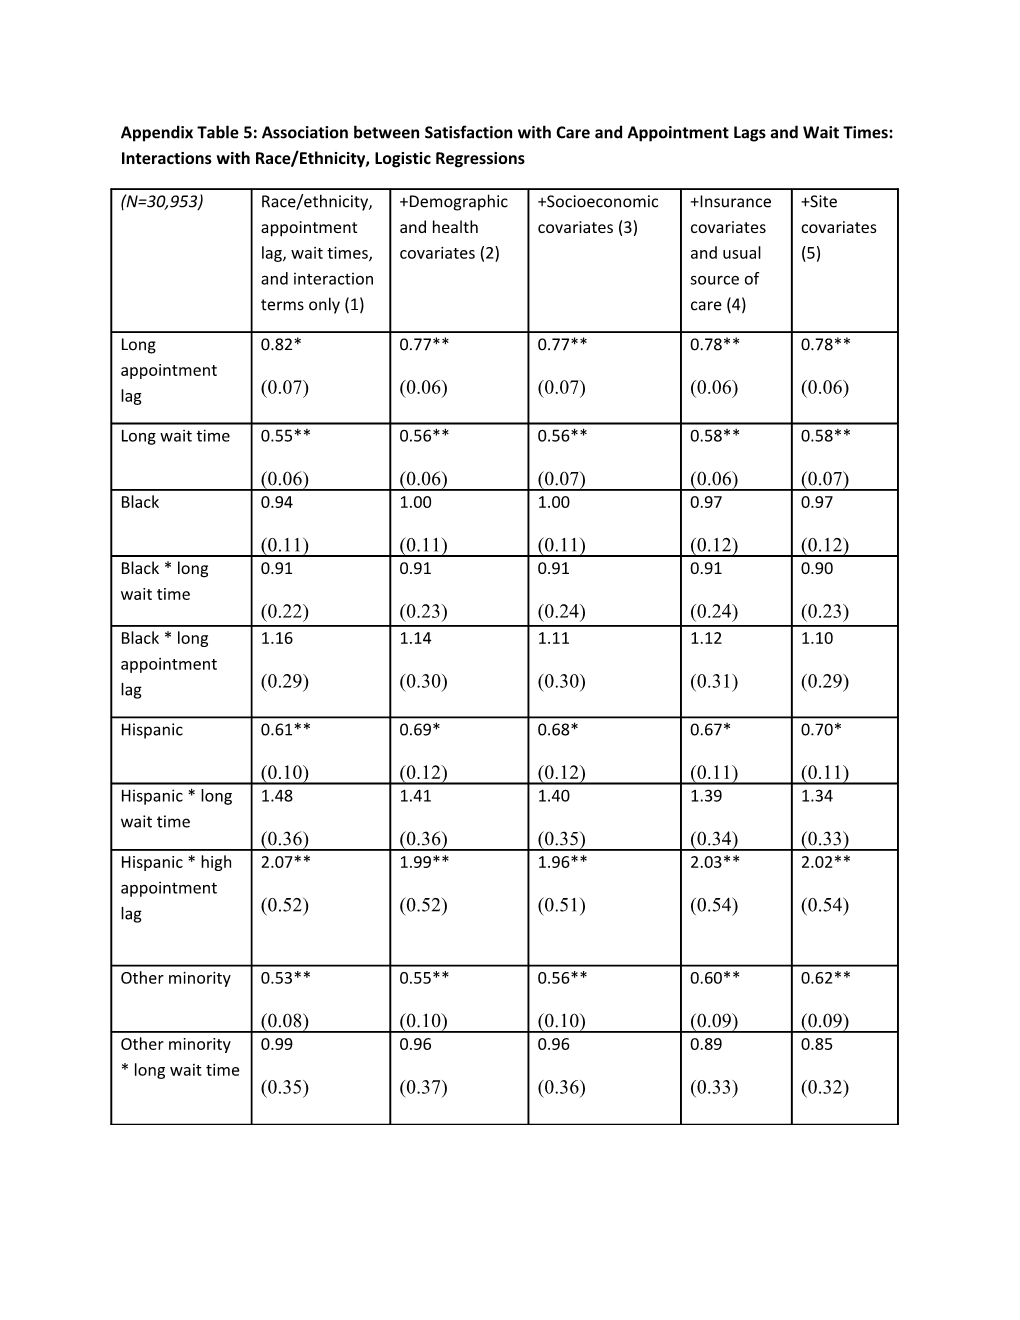 Appendix Table 5: Association Between Satisfaction with Care and Appointment Lags And